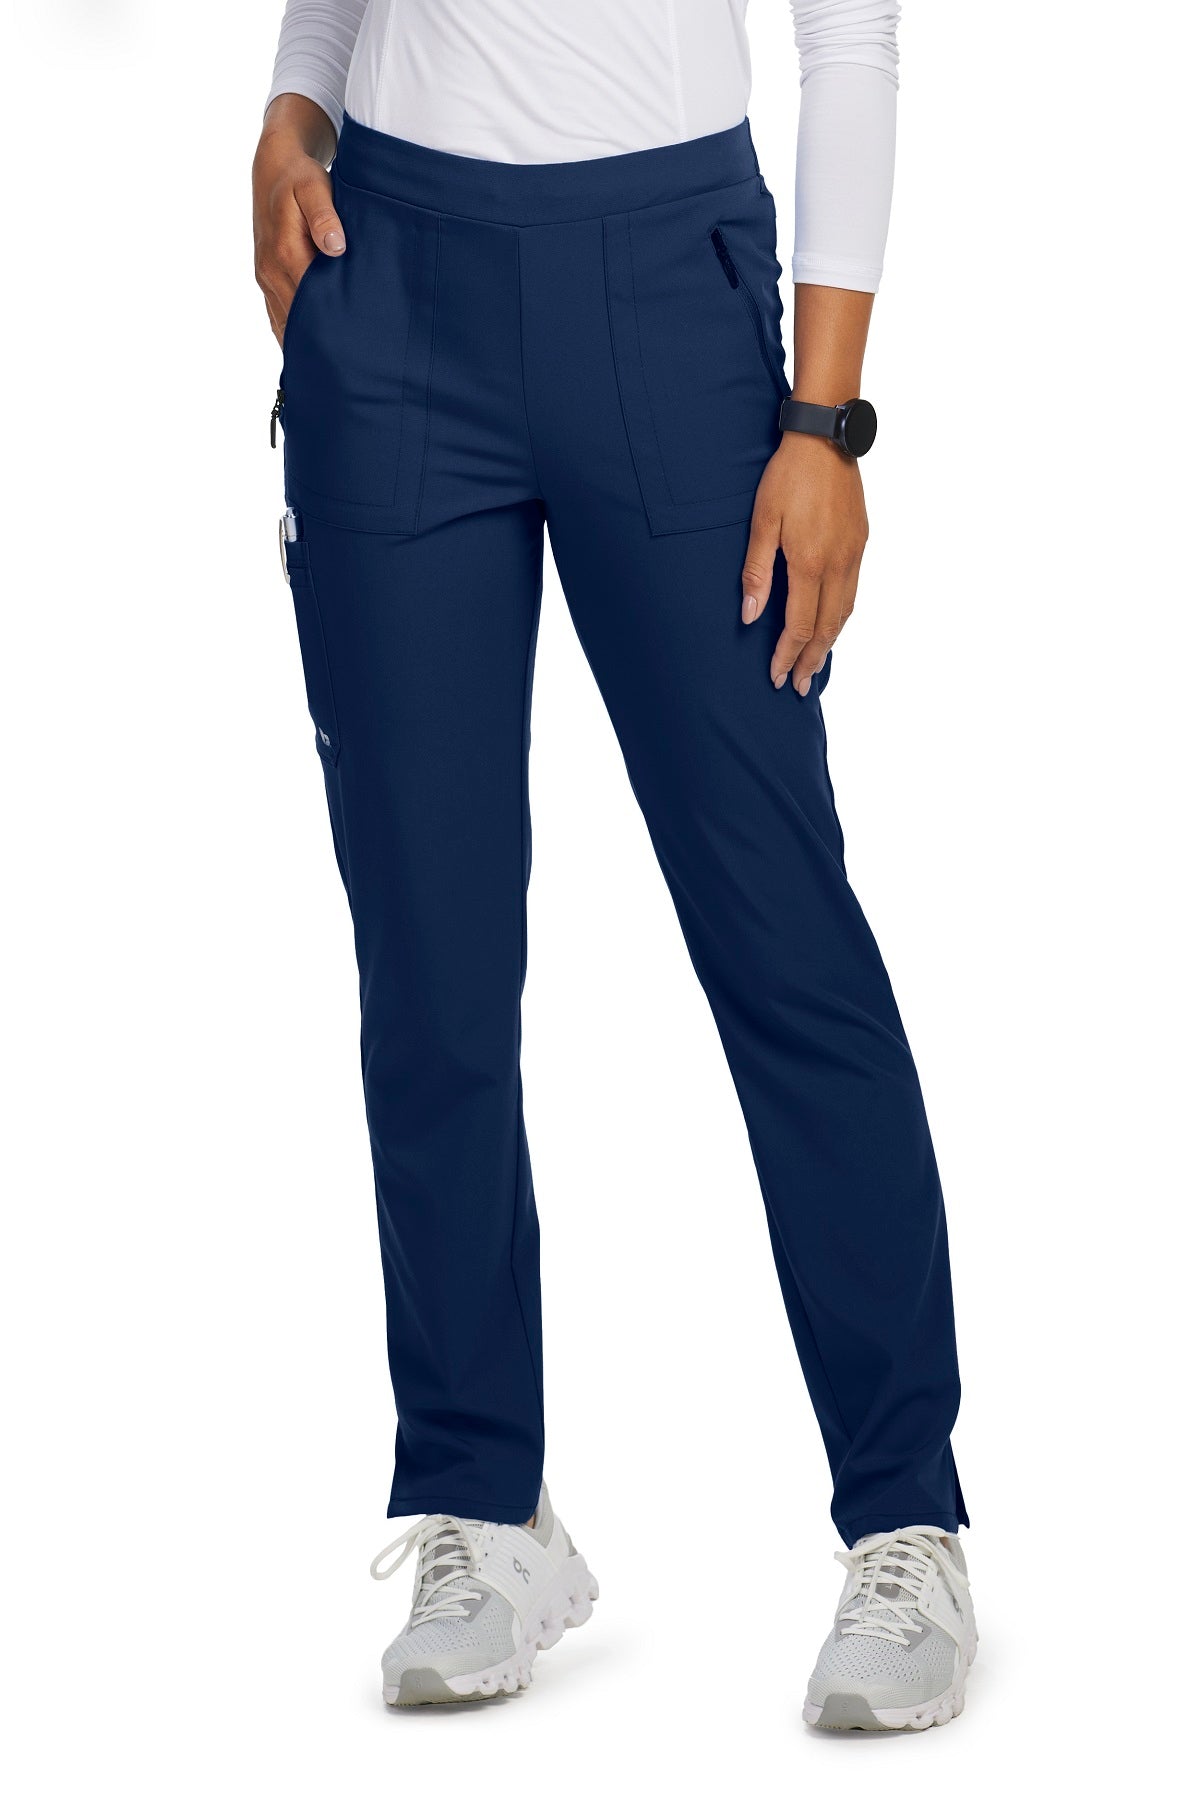 Barco Unify Petite Scrub Pants Purpose 5 Pocket in Indigo at Parker's Clothing and Shoes.